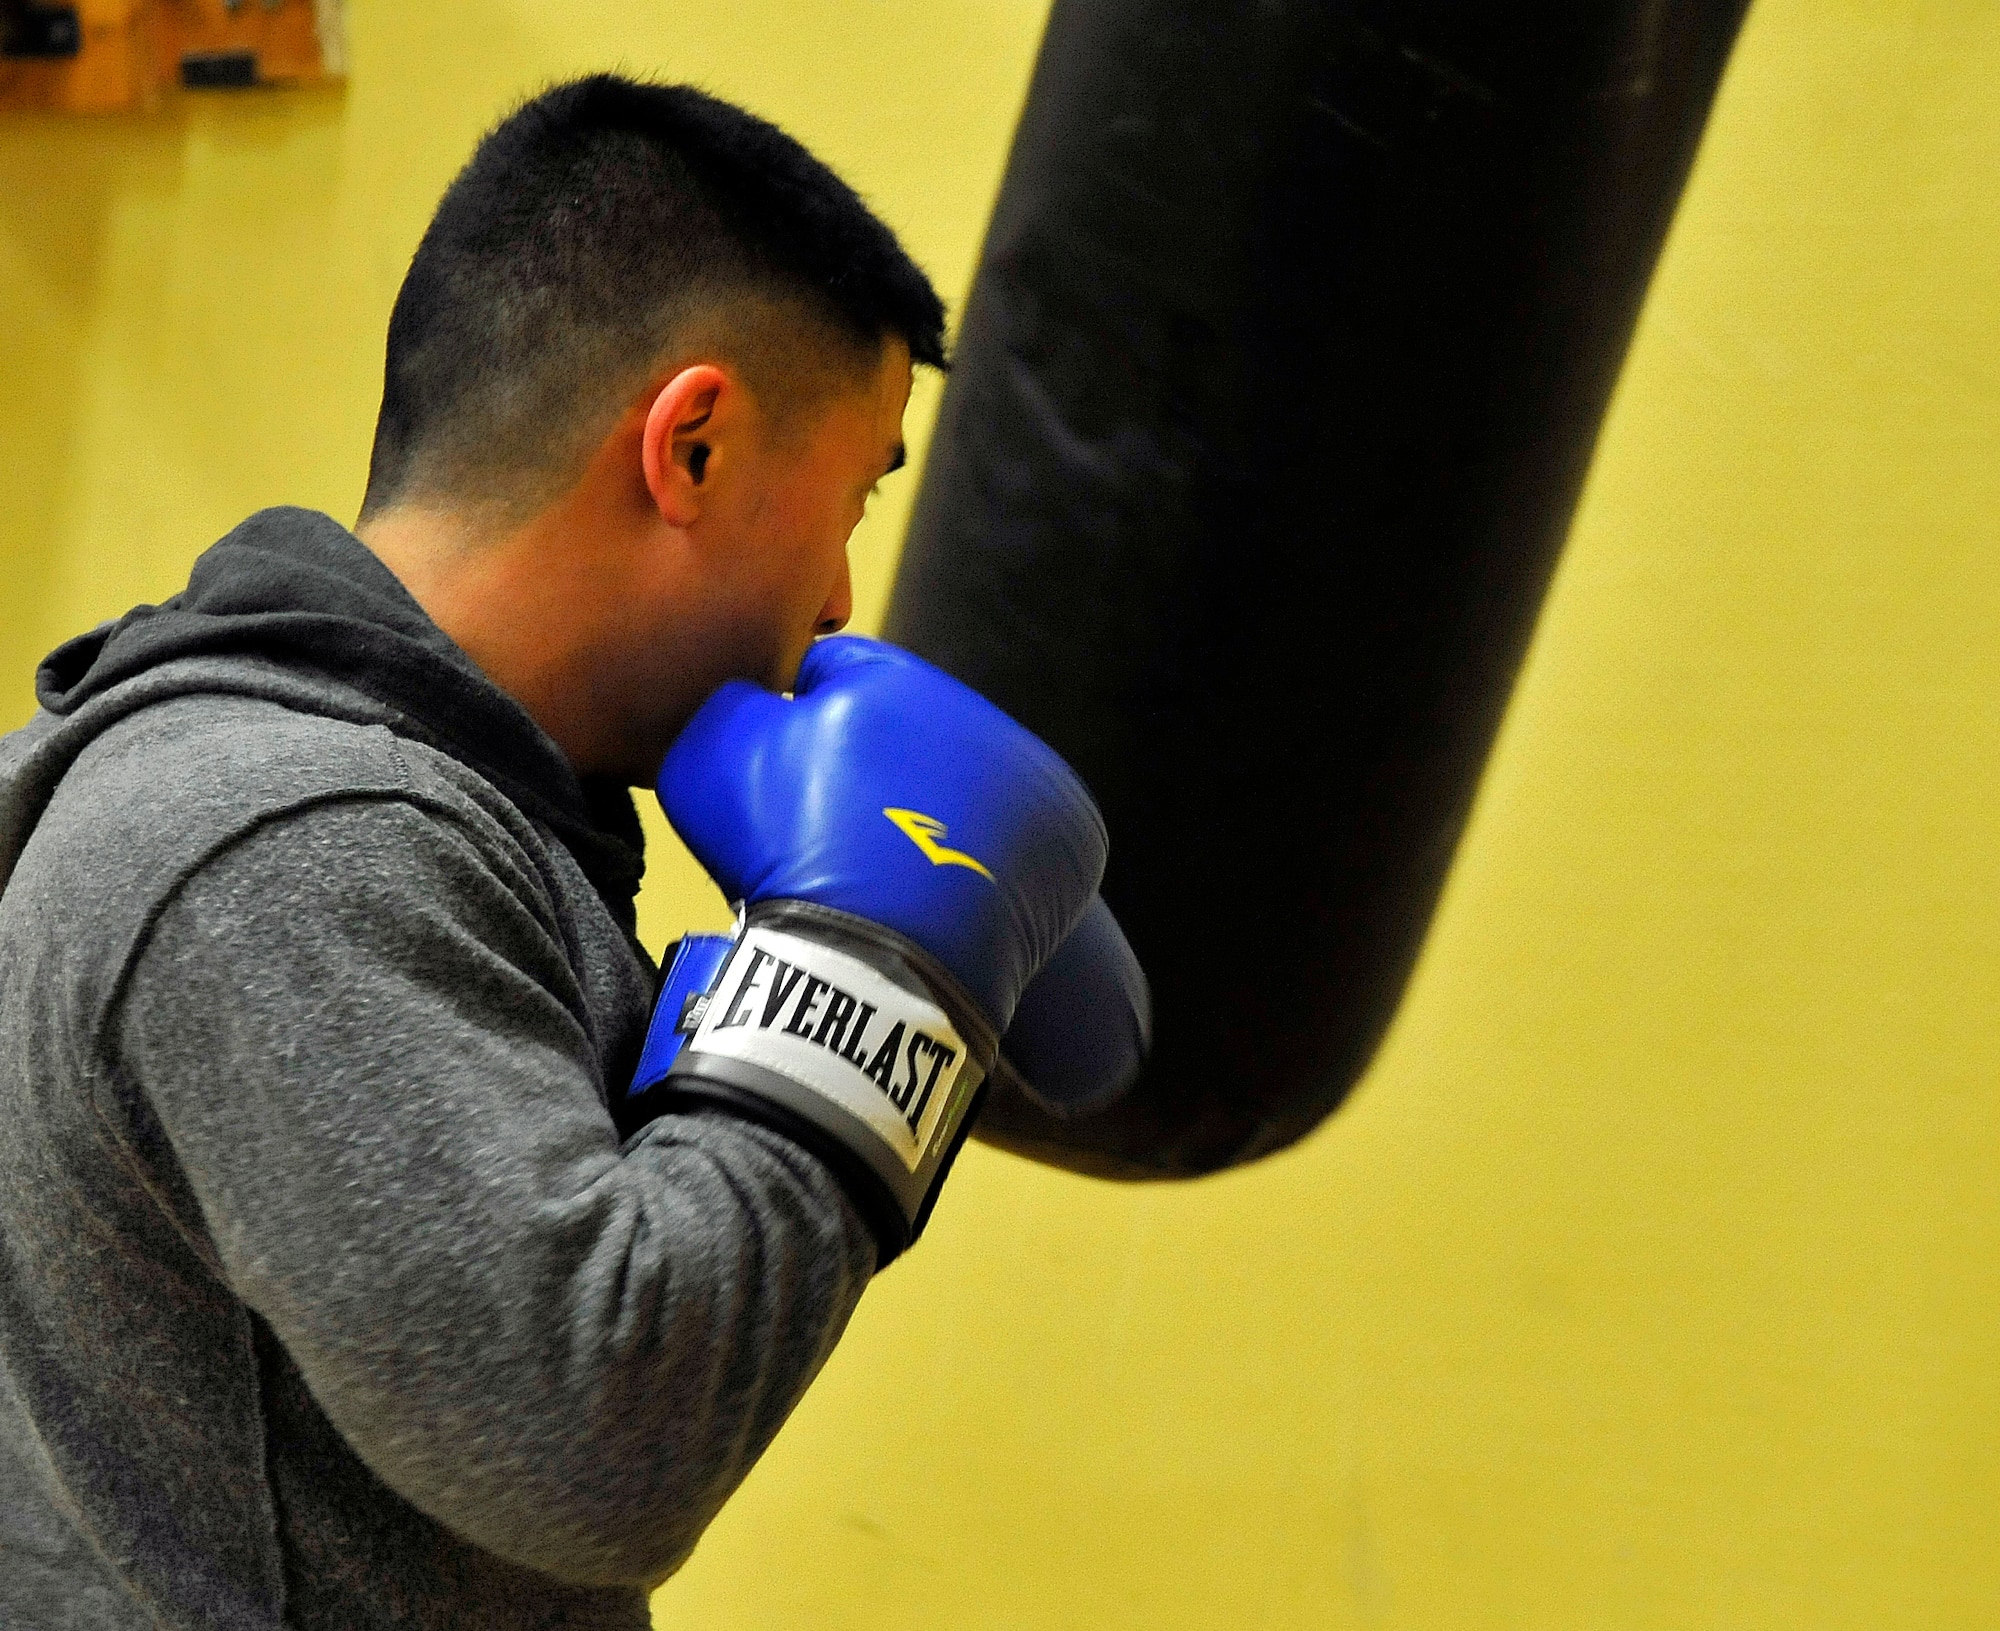 Capt. Larry Cornelio,786th Civil Engineer Squadron Kaiserslautern Operations Flight commander, trains on the heavy punching bag, Feb. 27, 2013, Miesau Army Depot, Germany. The combination of cardio, cross training and strength training makes boxing a great alternate workout for any fitness level. (U.S. Air Force photo/Airman 1st Class Trevor Rhynes)